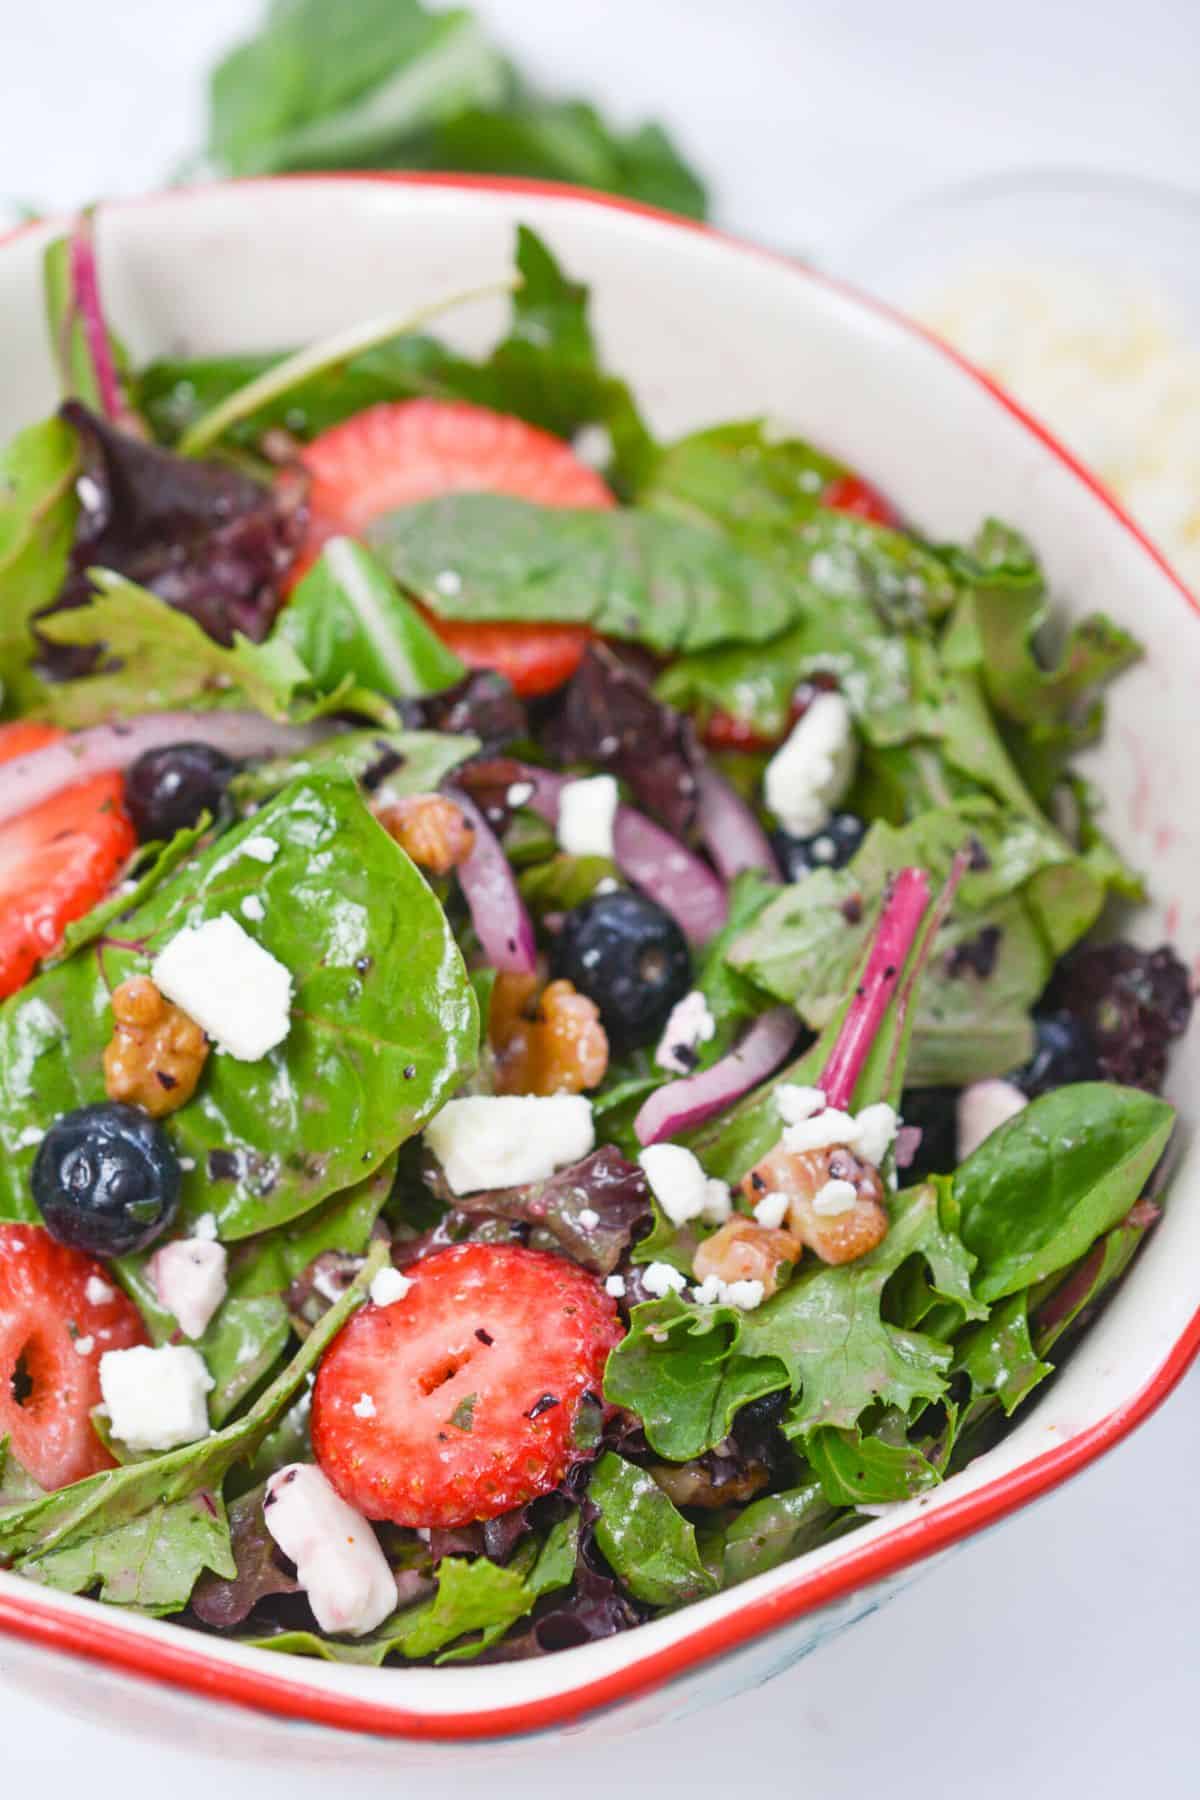 A bowl of salad with strawberries, blueberries and feta cheese.